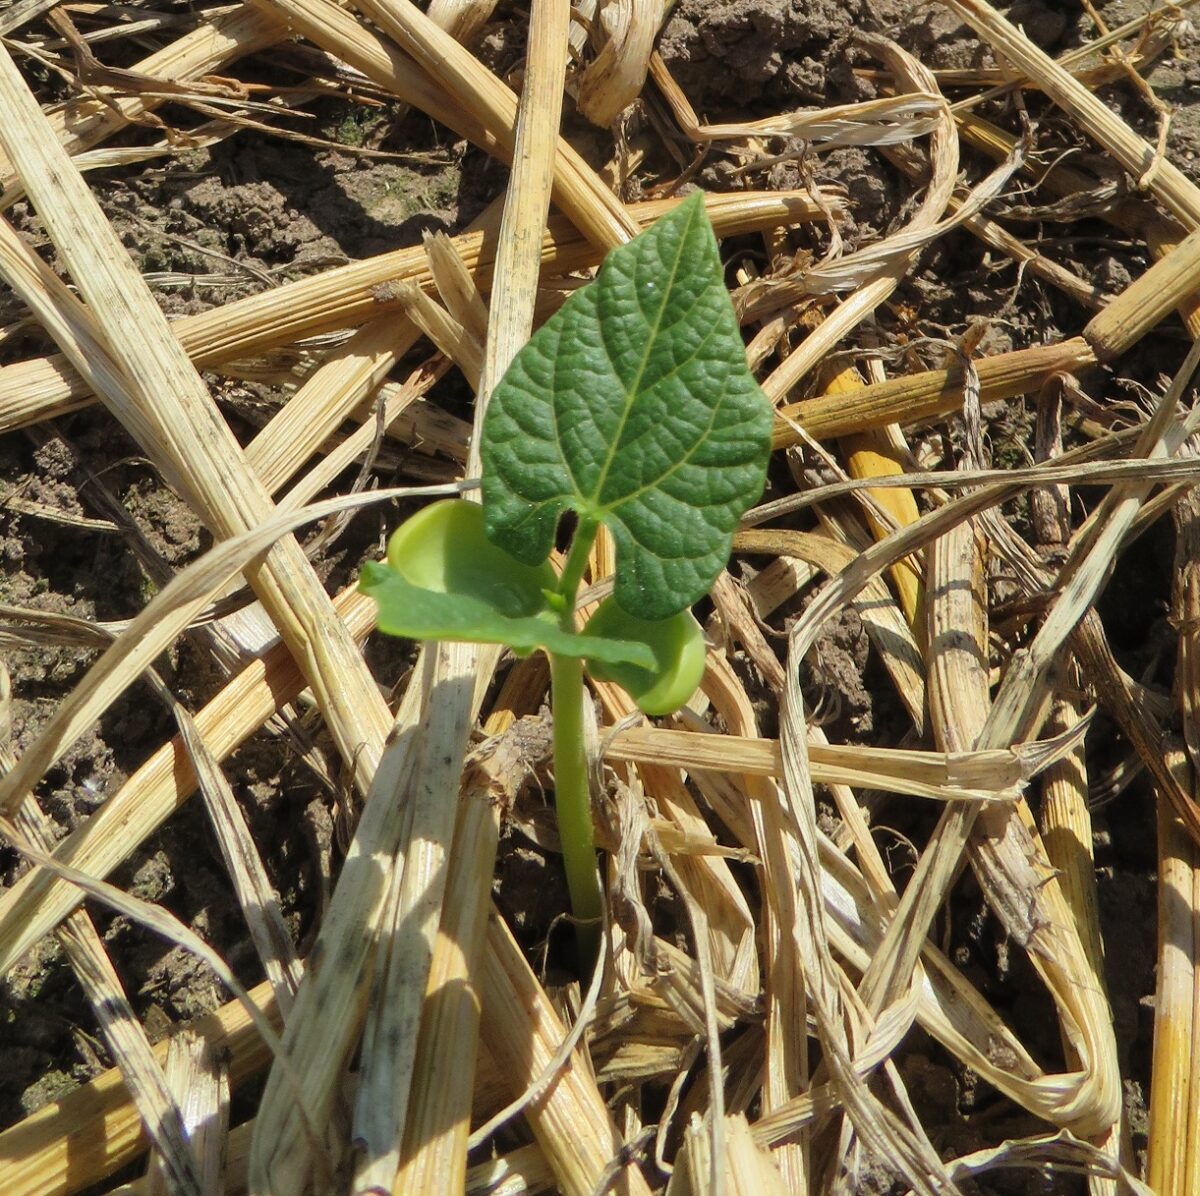 A single dry bean plant at the unifoliate leaf stage growing in a field that has not been tilled